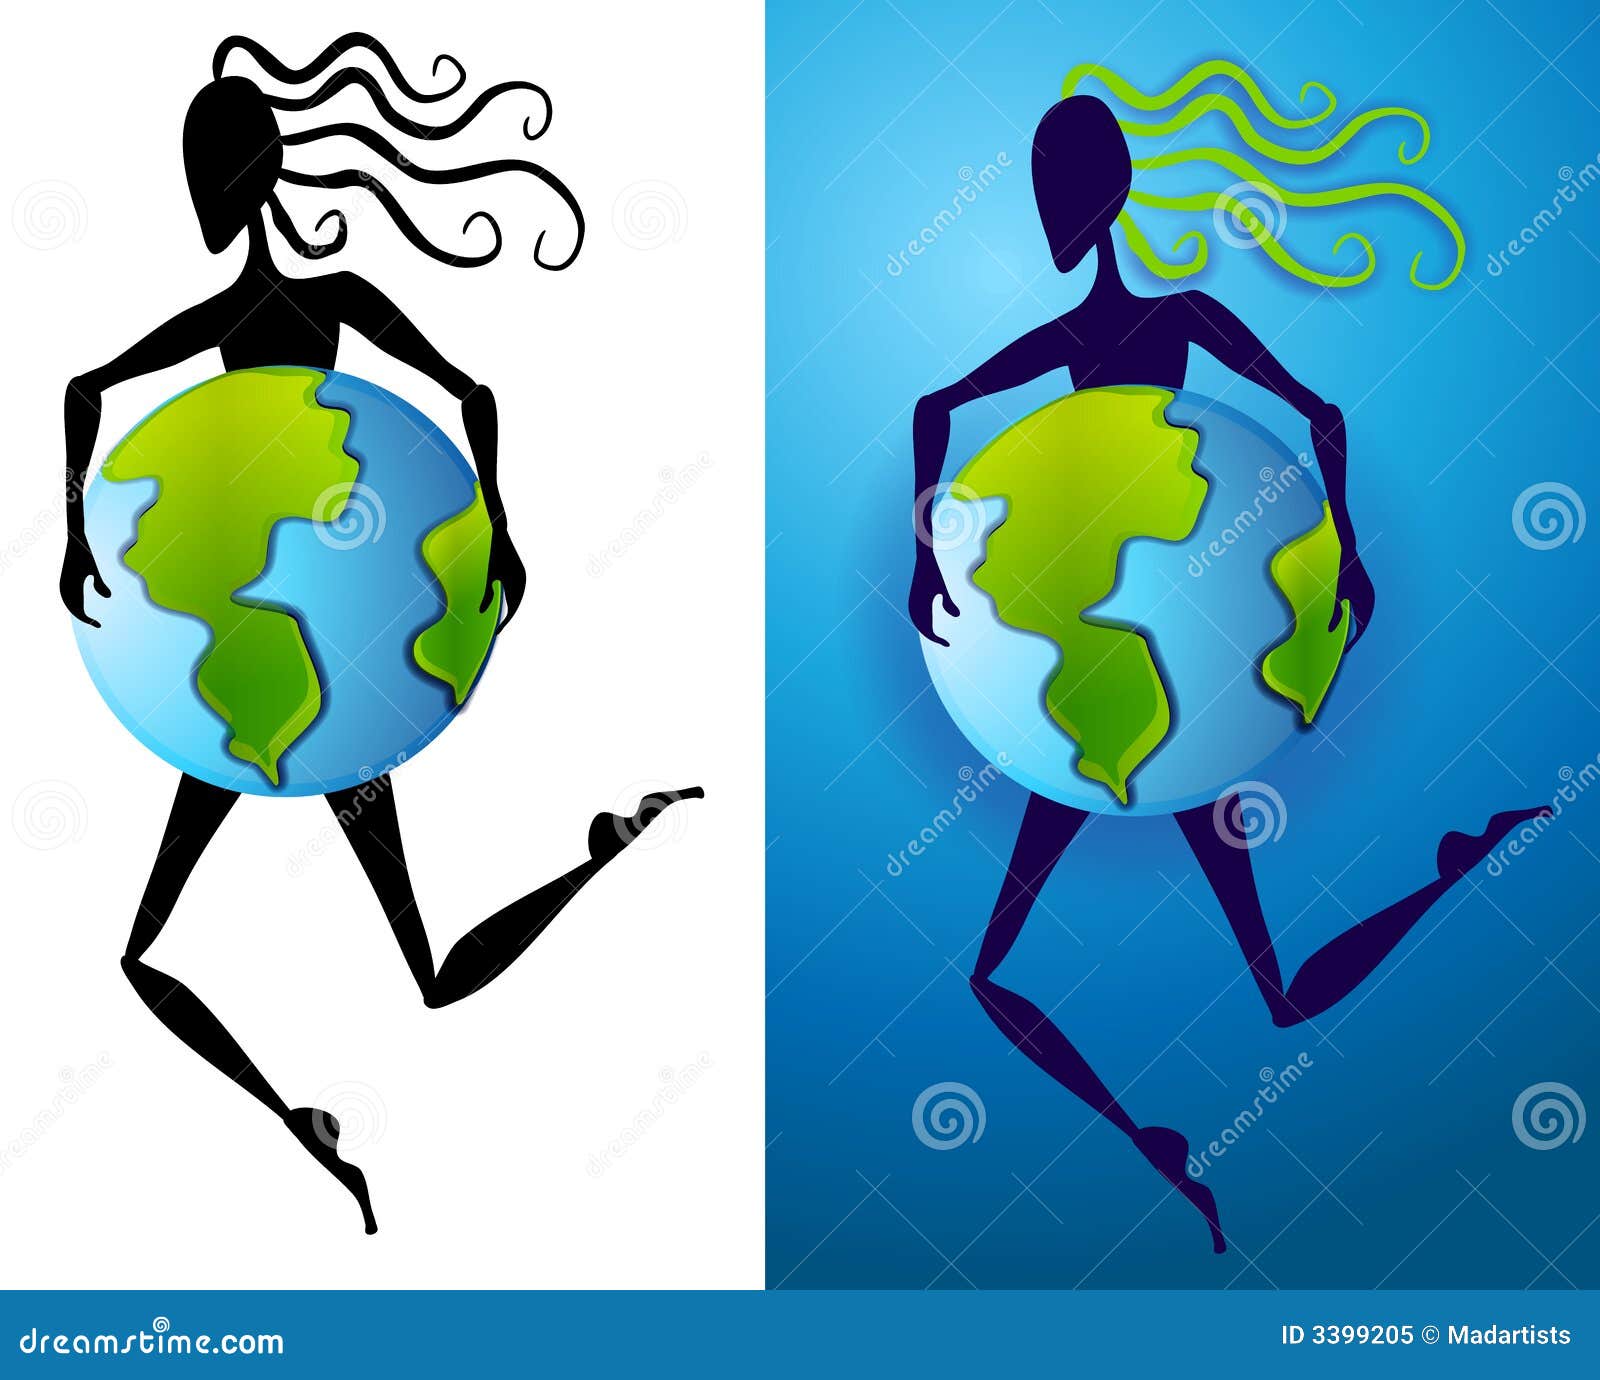 mother nature clipart - photo #16